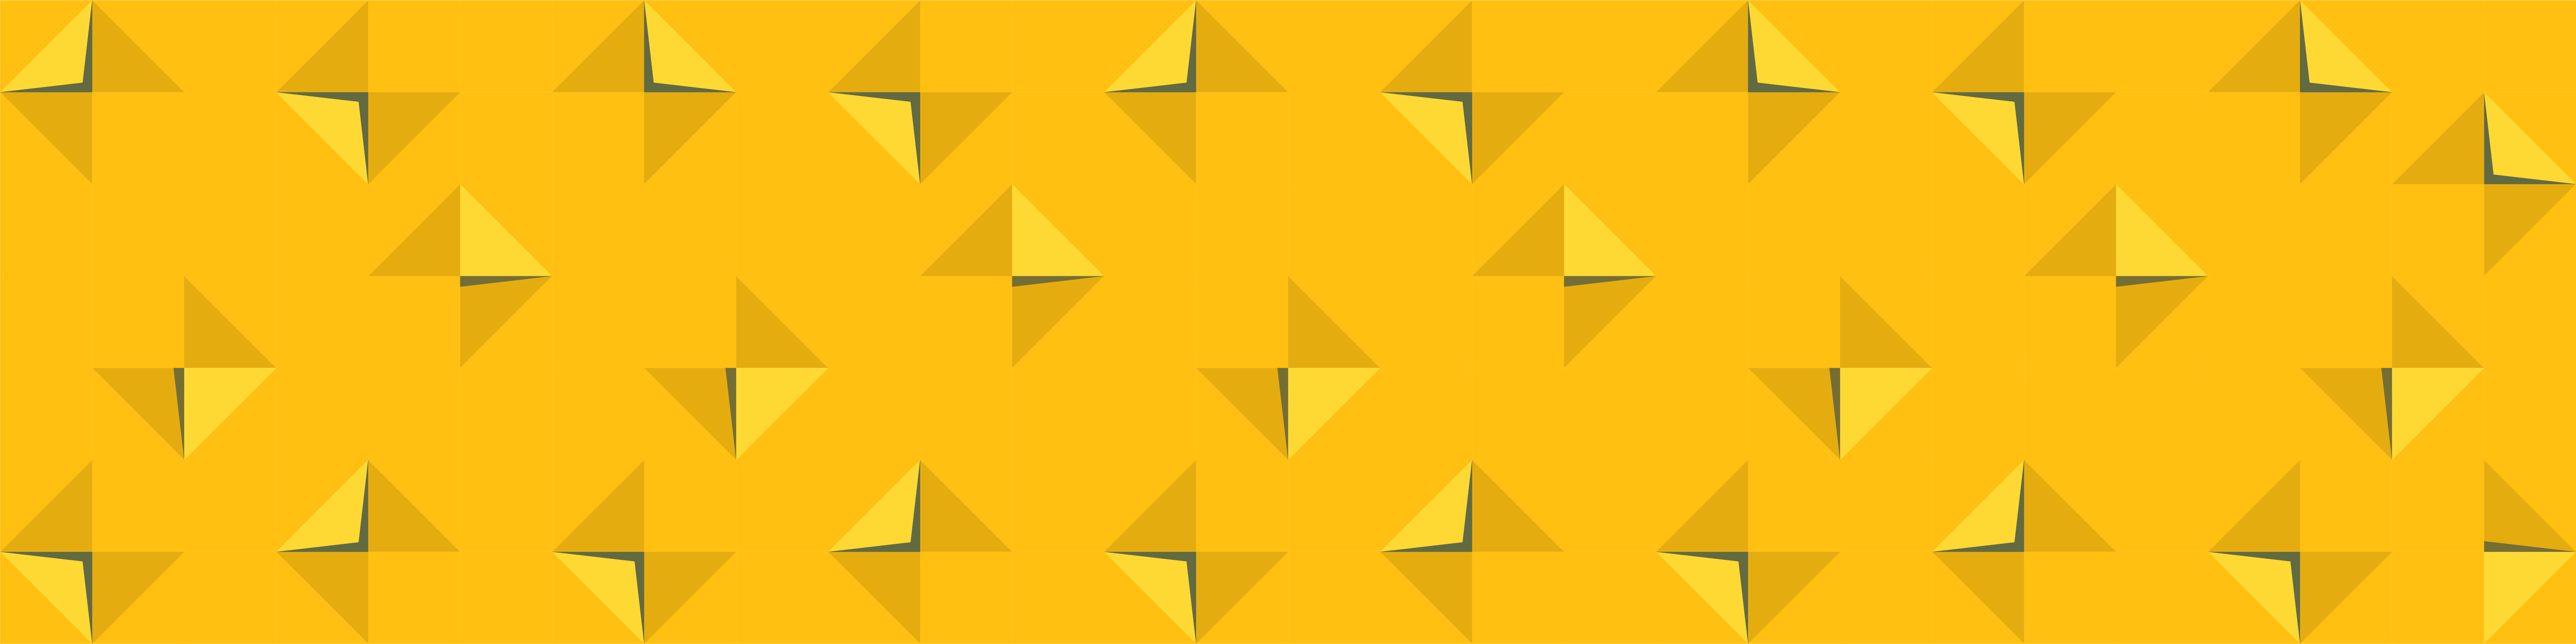 Featured Image Origami Yellow Lots